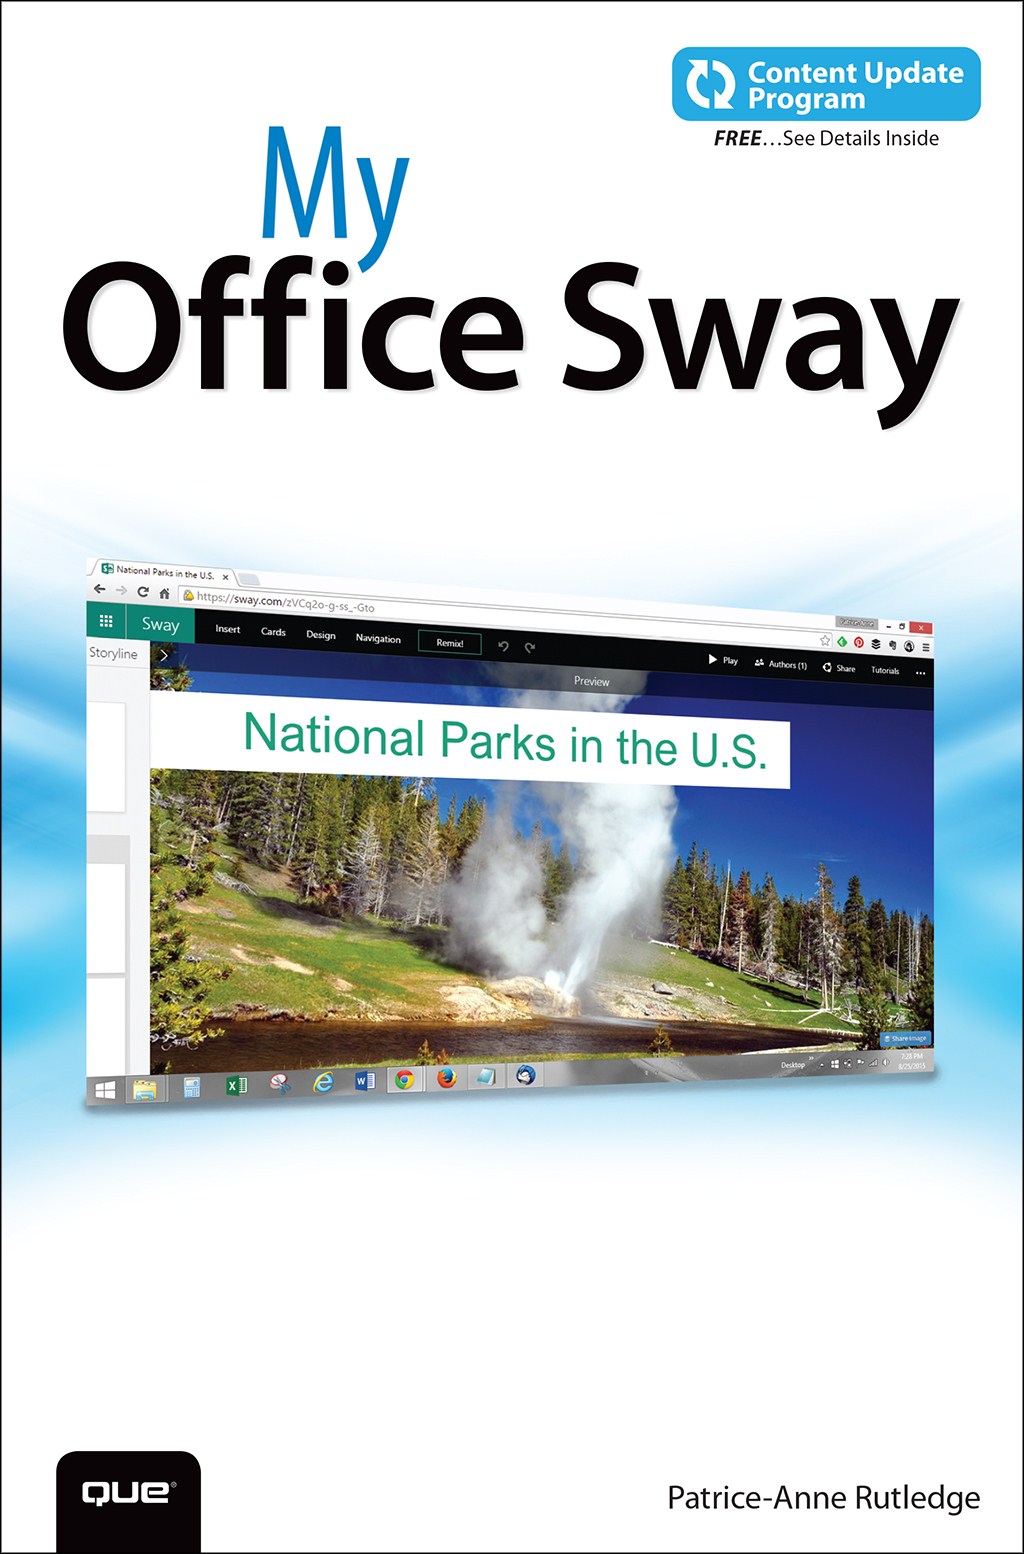 My Office Sway (includes Content Update Program)